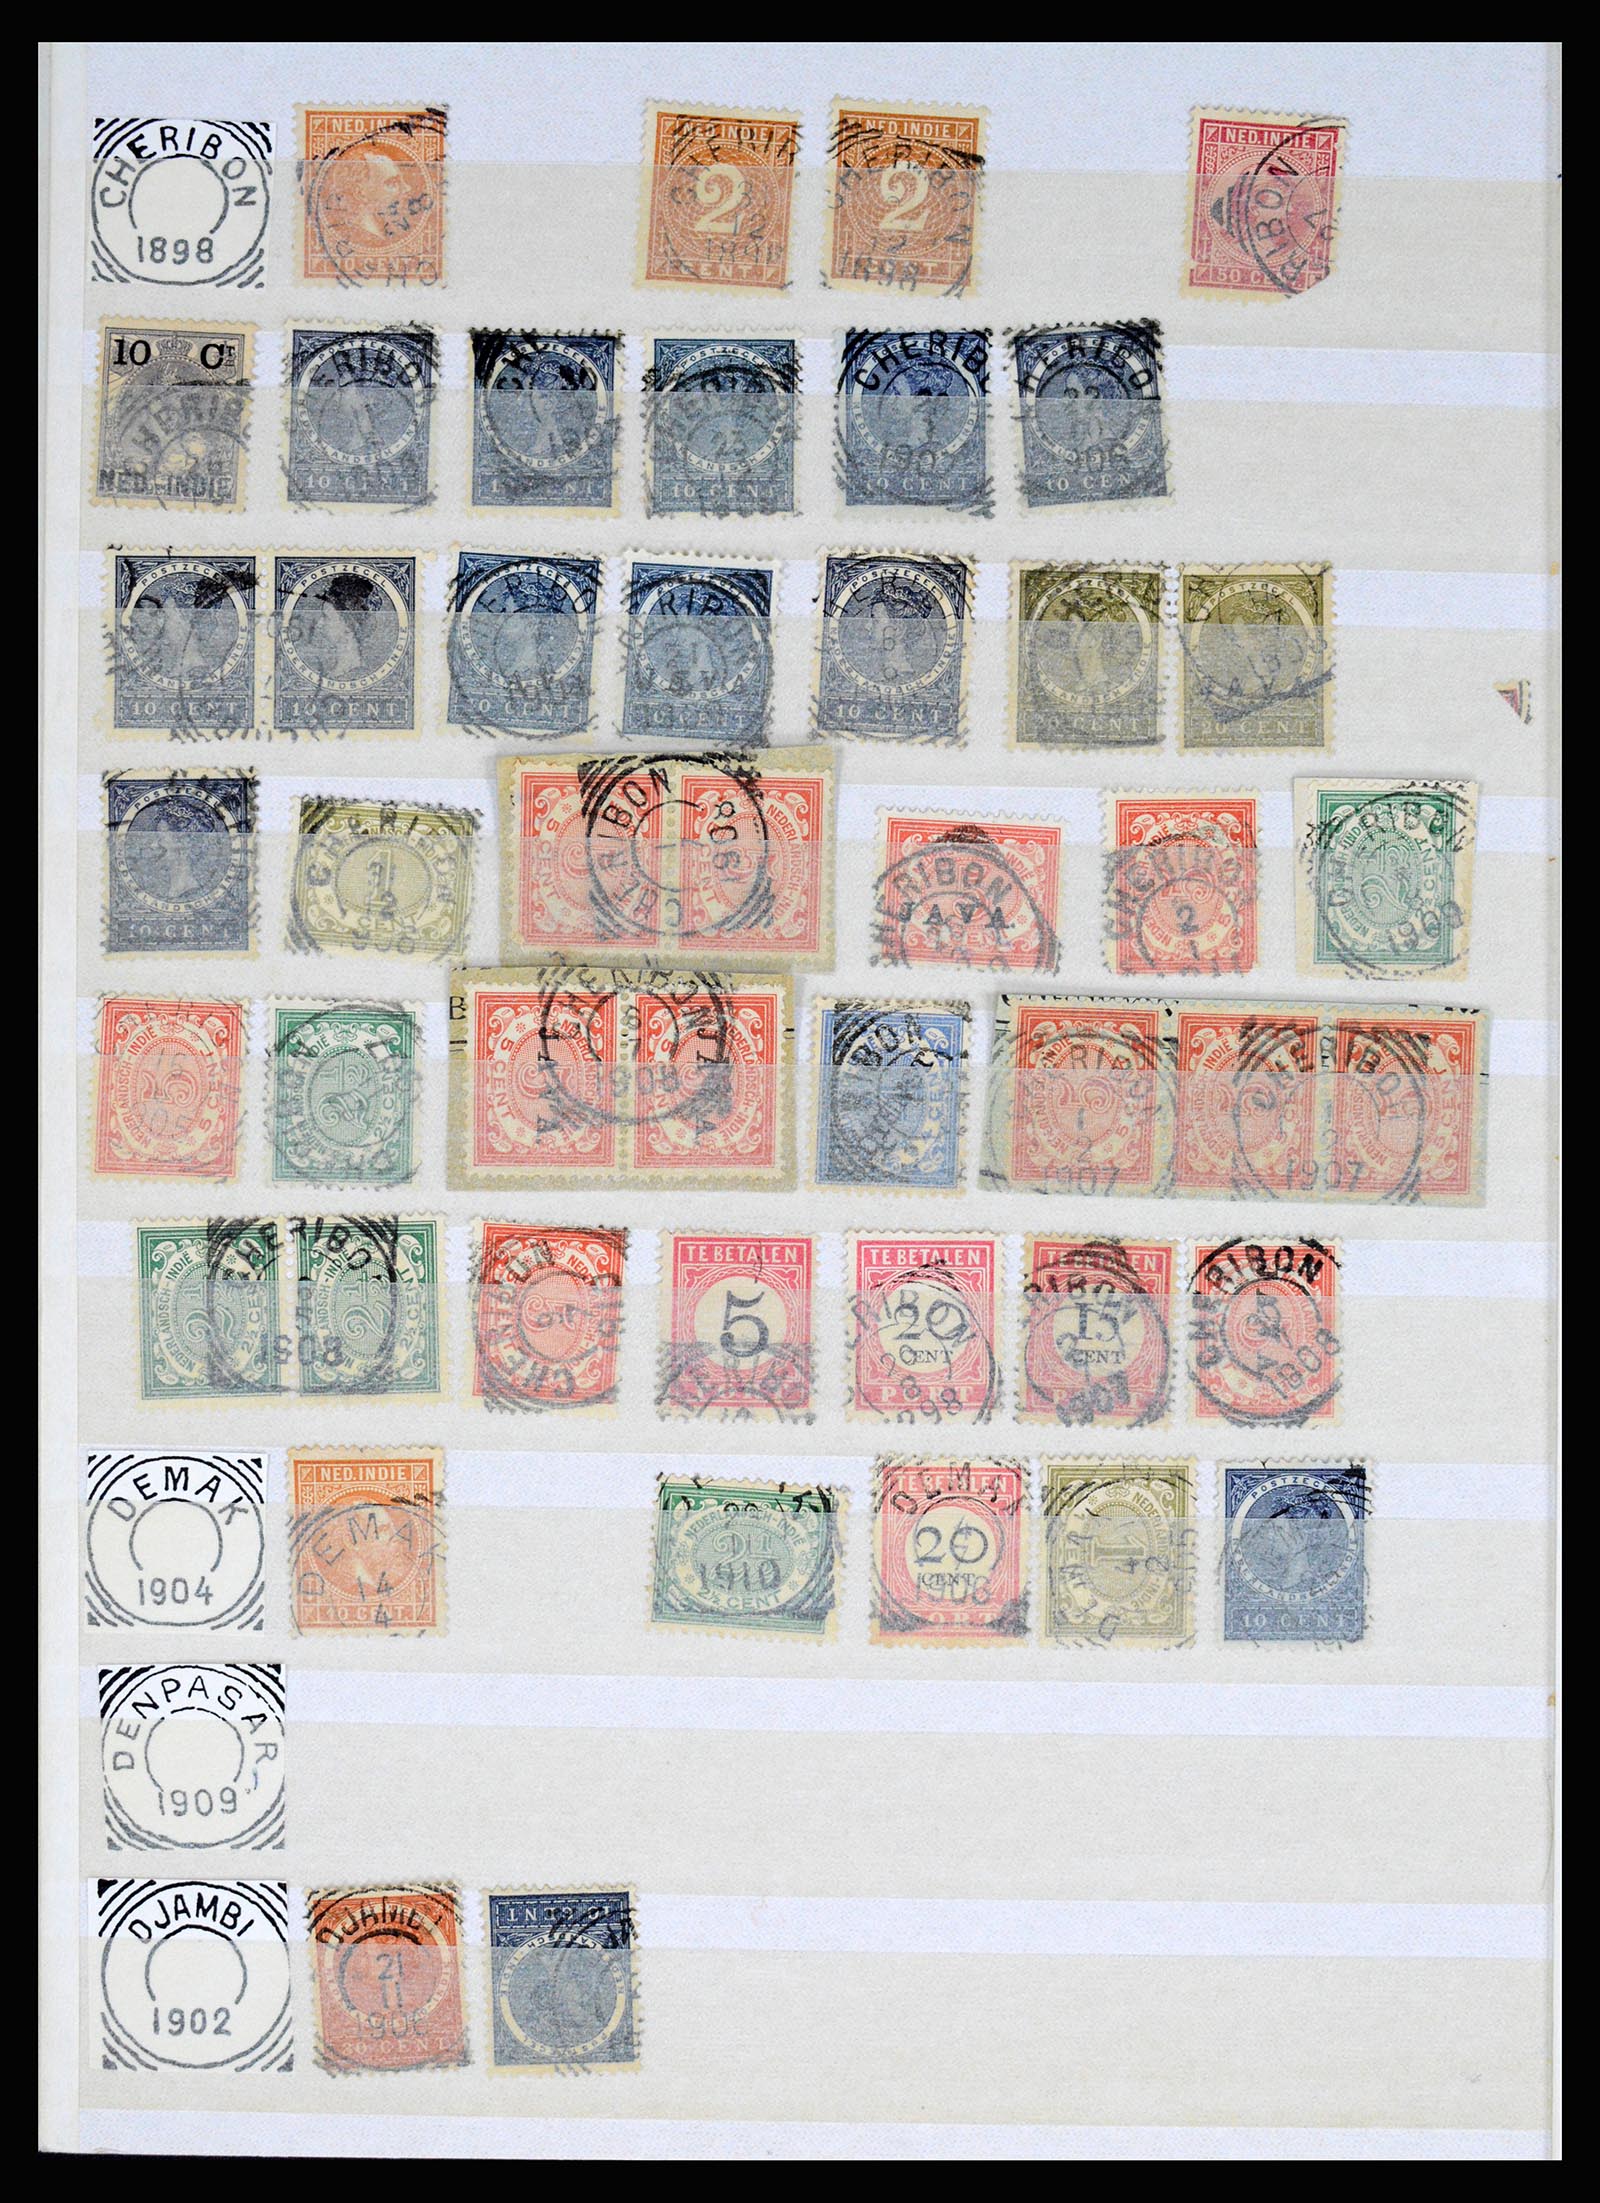 36839 067 - Stamp collection 36839 Dutch east Indies square cancels.